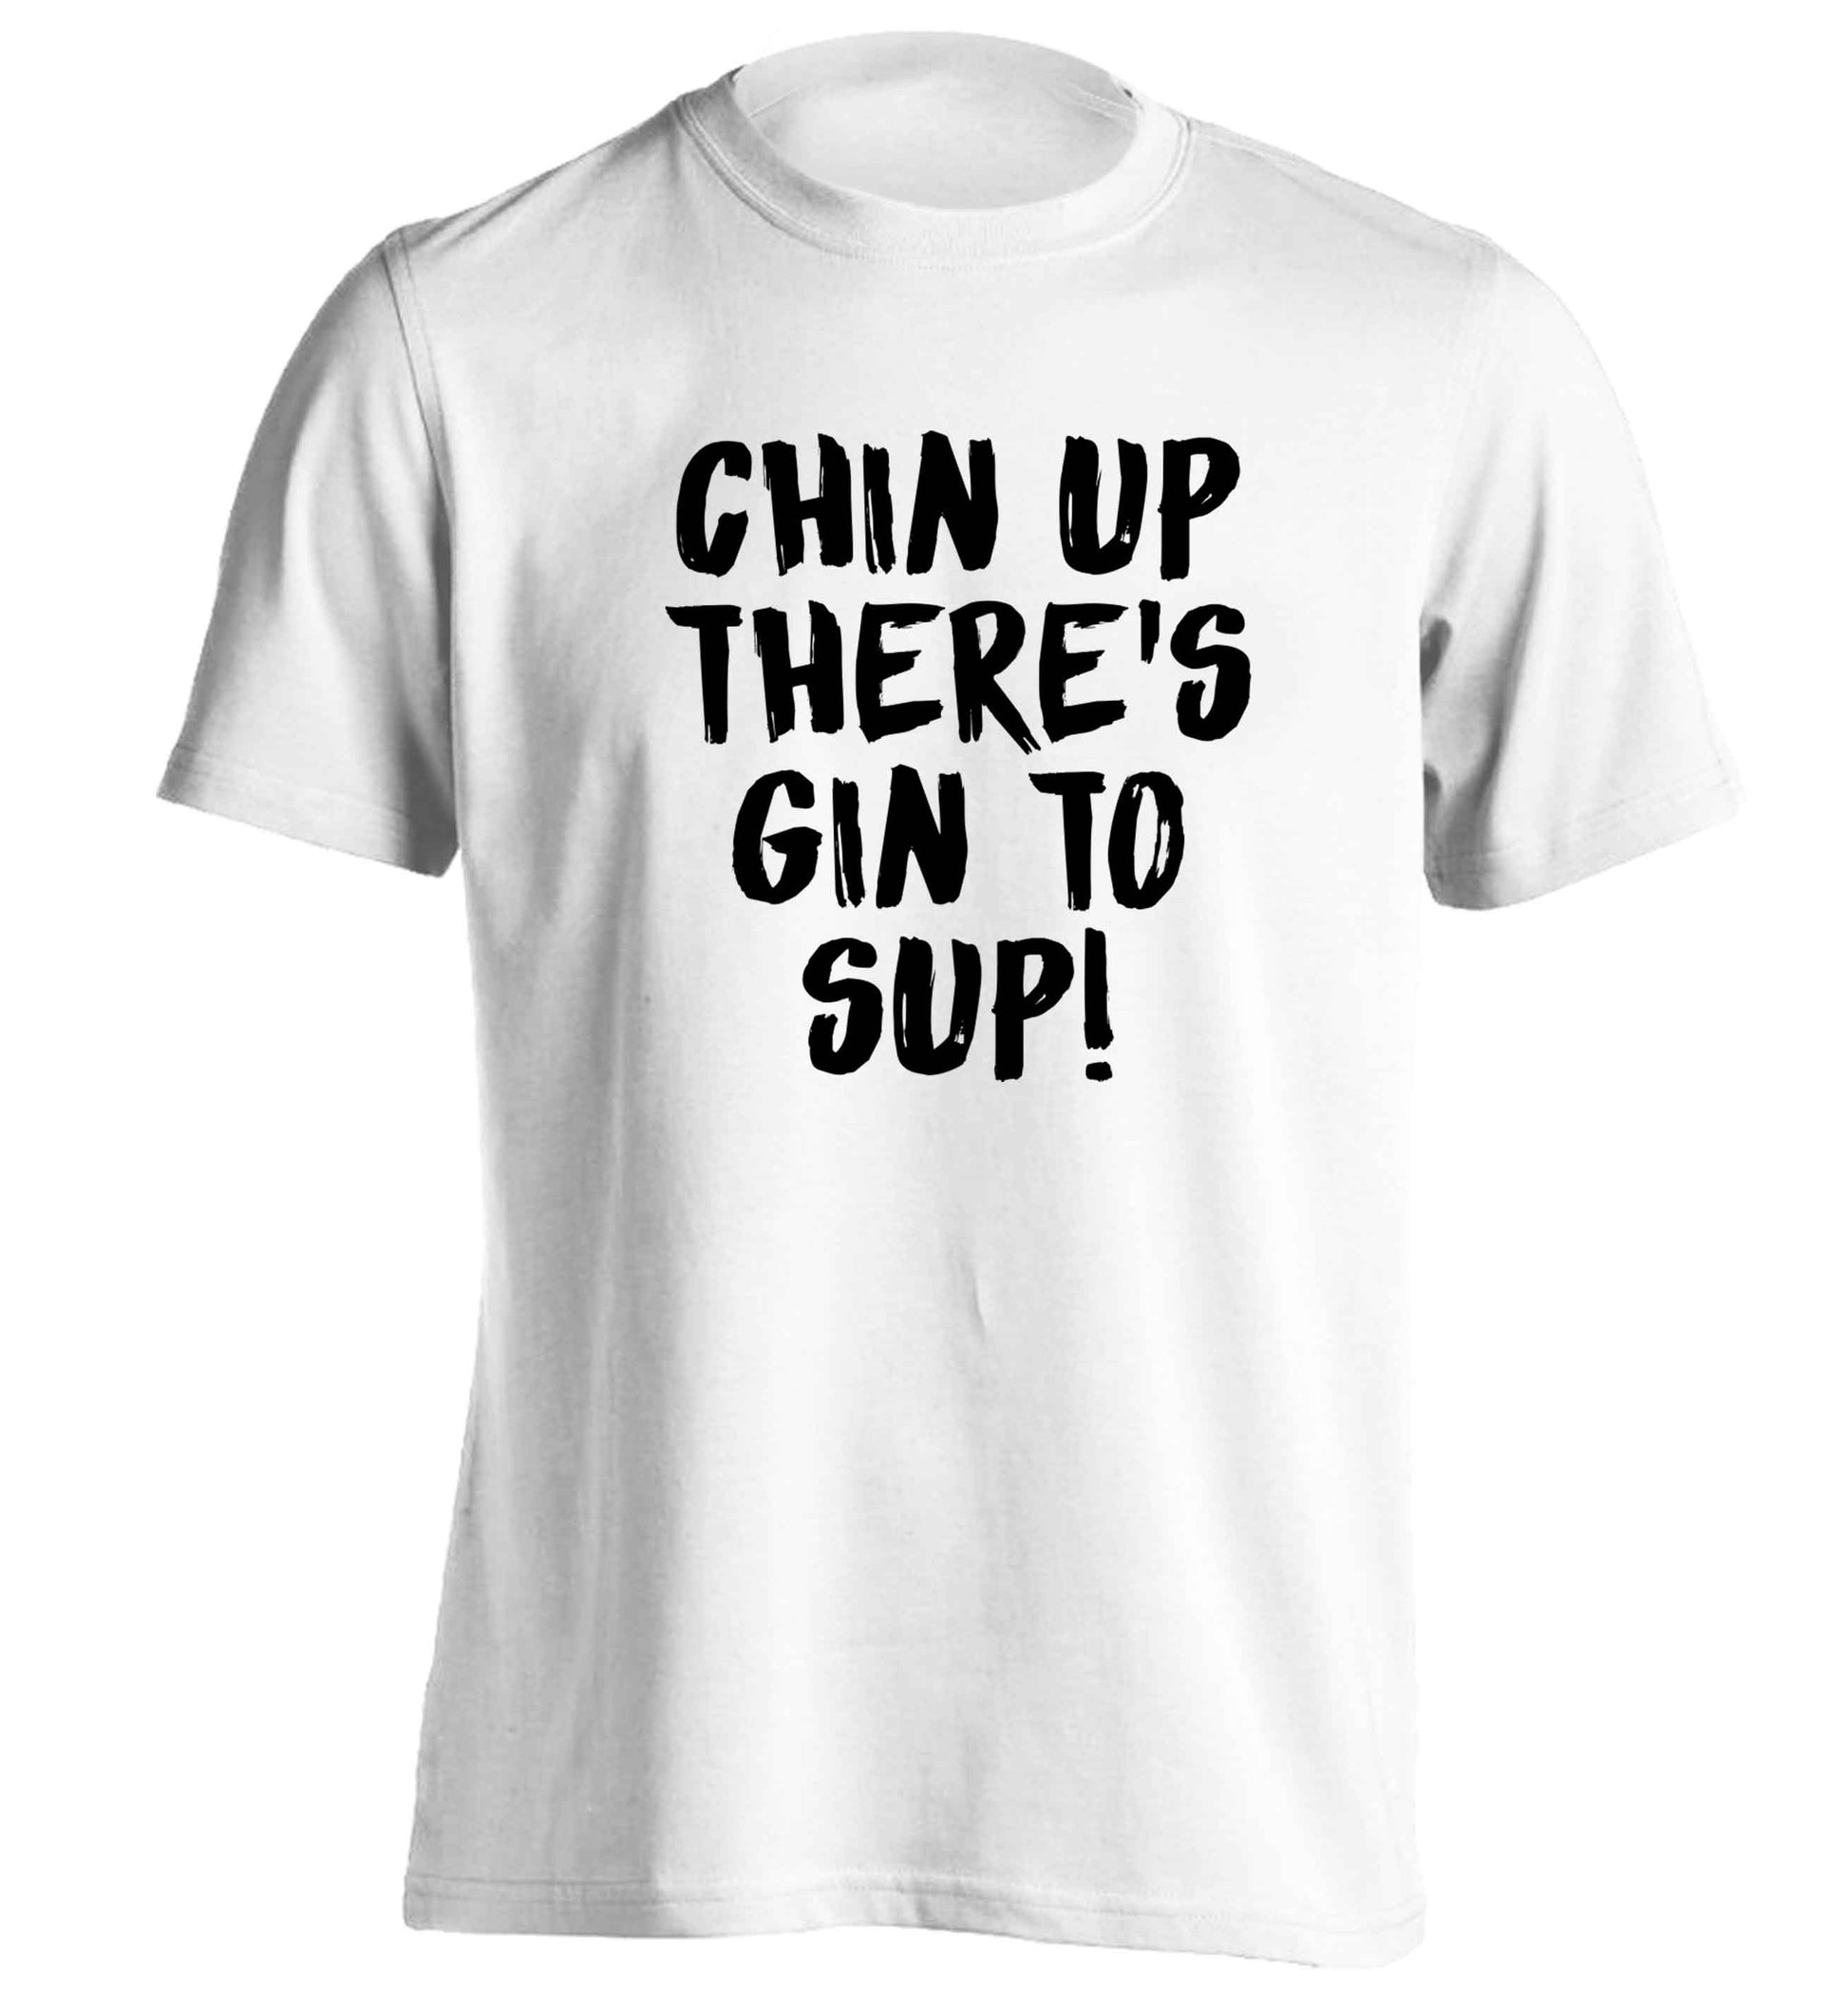 Chin up there's gin to sup adults unisex white Tshirt 2XL